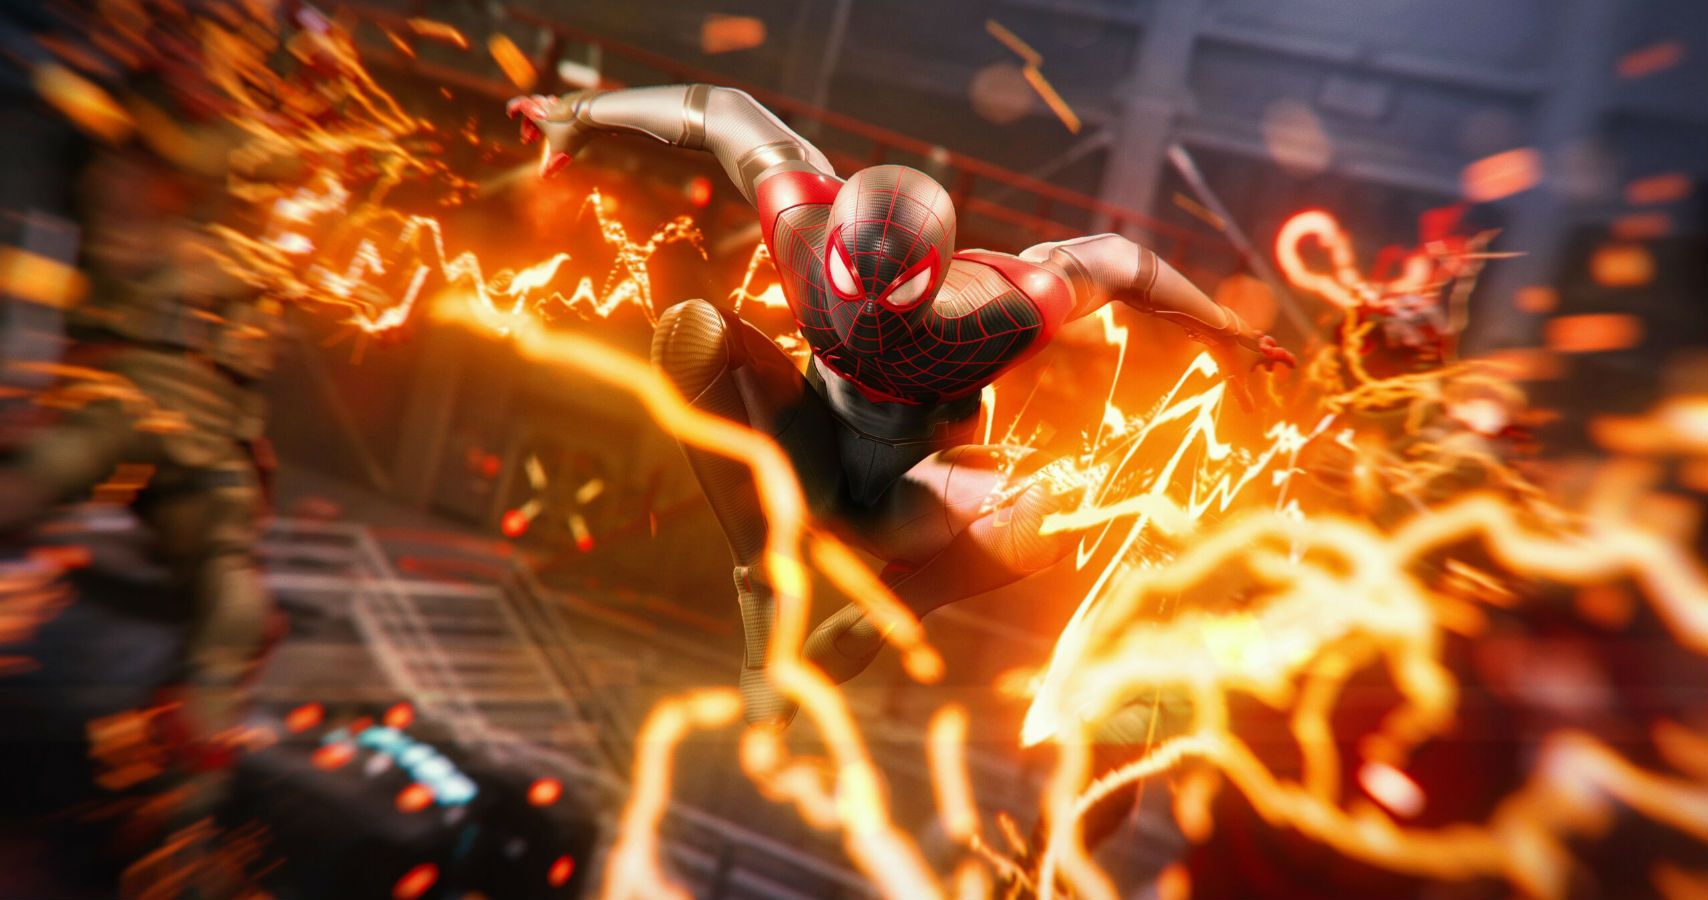 Spider-Man: Miles Morales' combines ray tracing and 60FPS in new PS5 mode